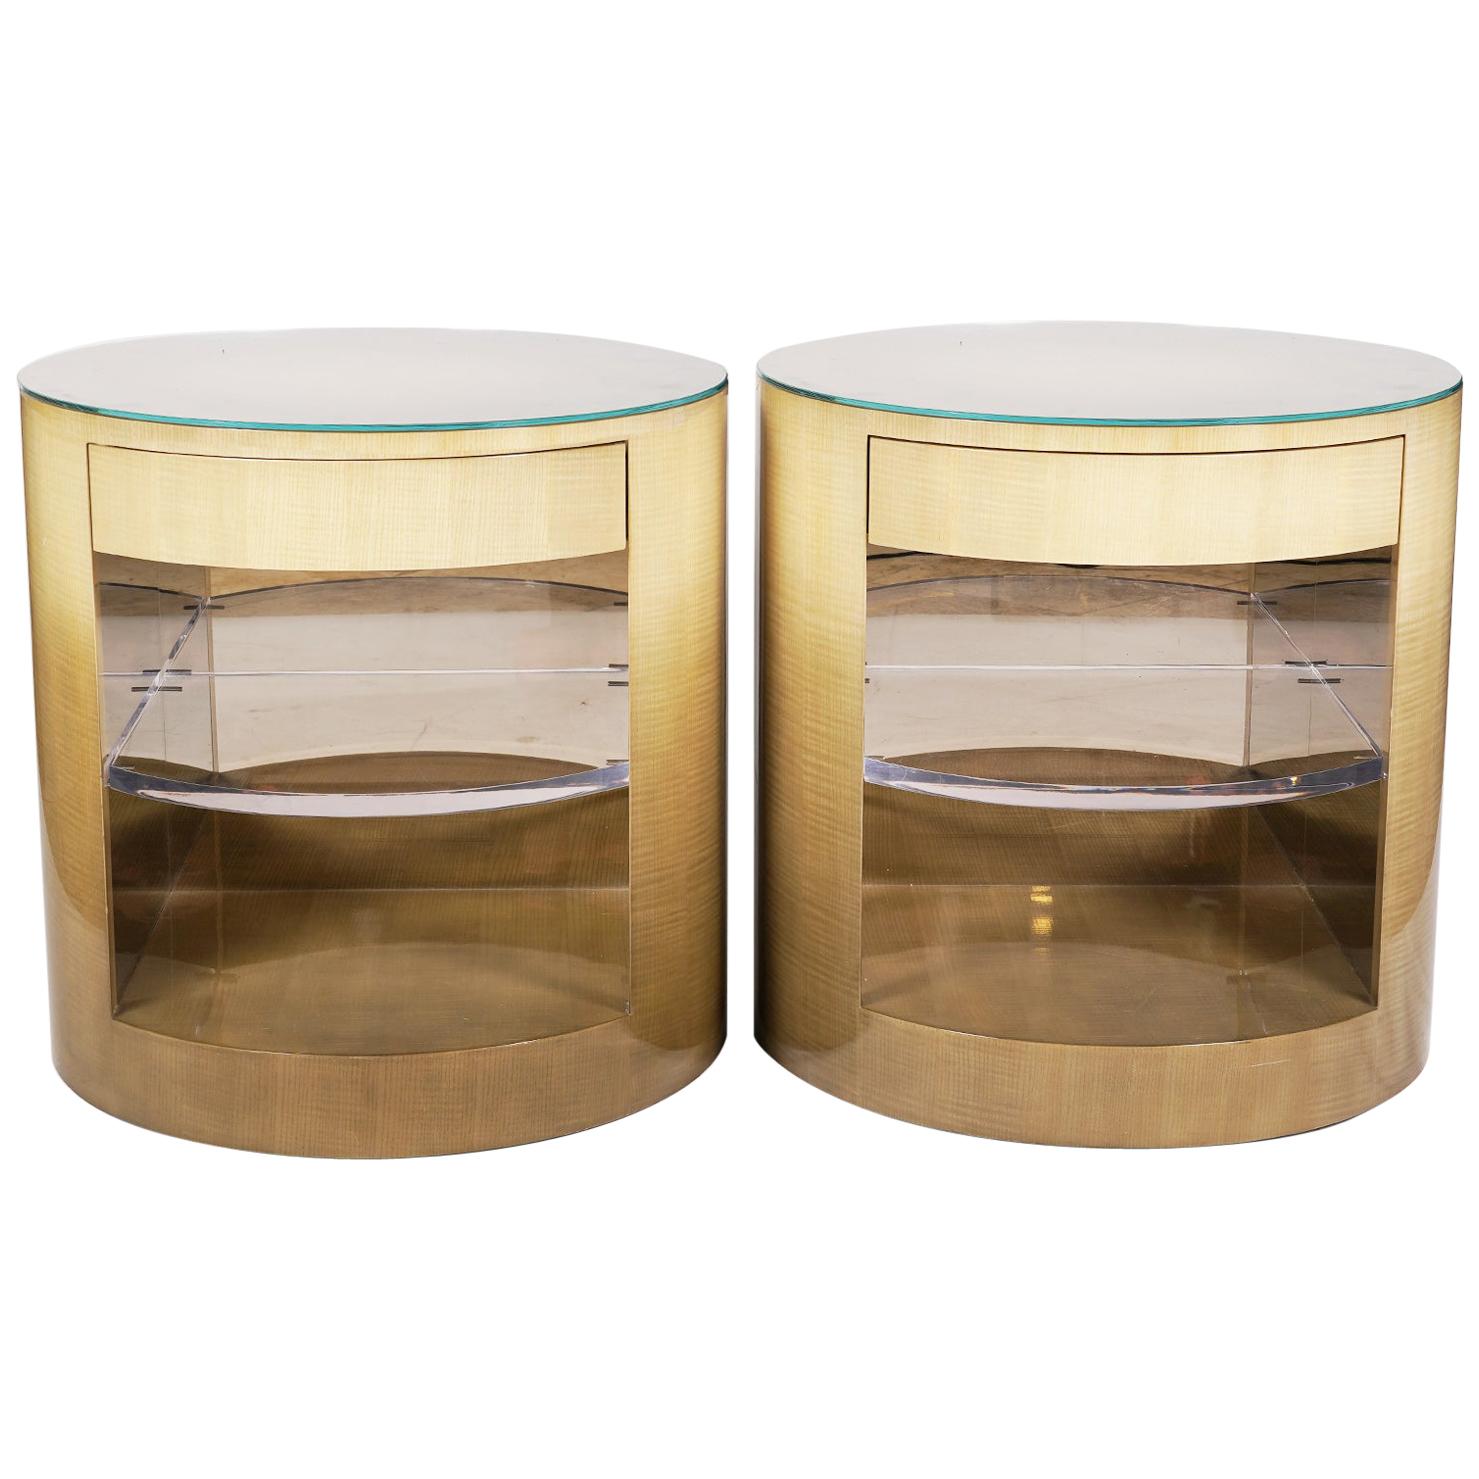 Pair of Cilindro Side Tables Designed by Sally Sirkin Lewis for J. Robert Scott